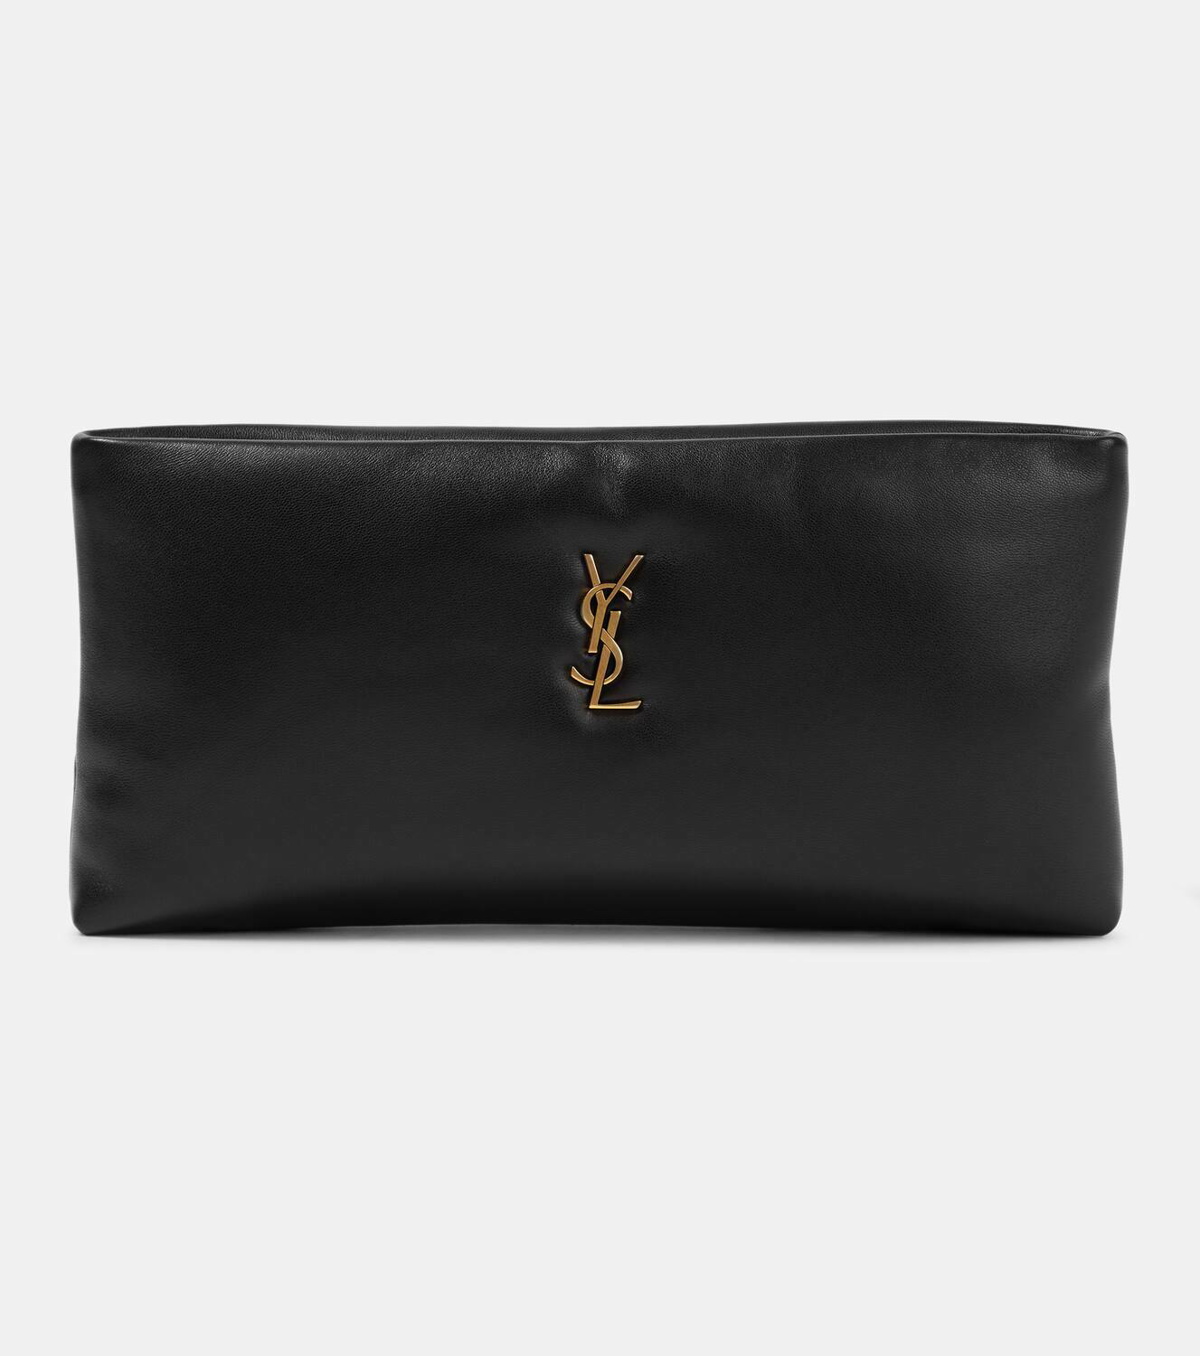 Calypso Small leather pouch in red - Saint Laurent